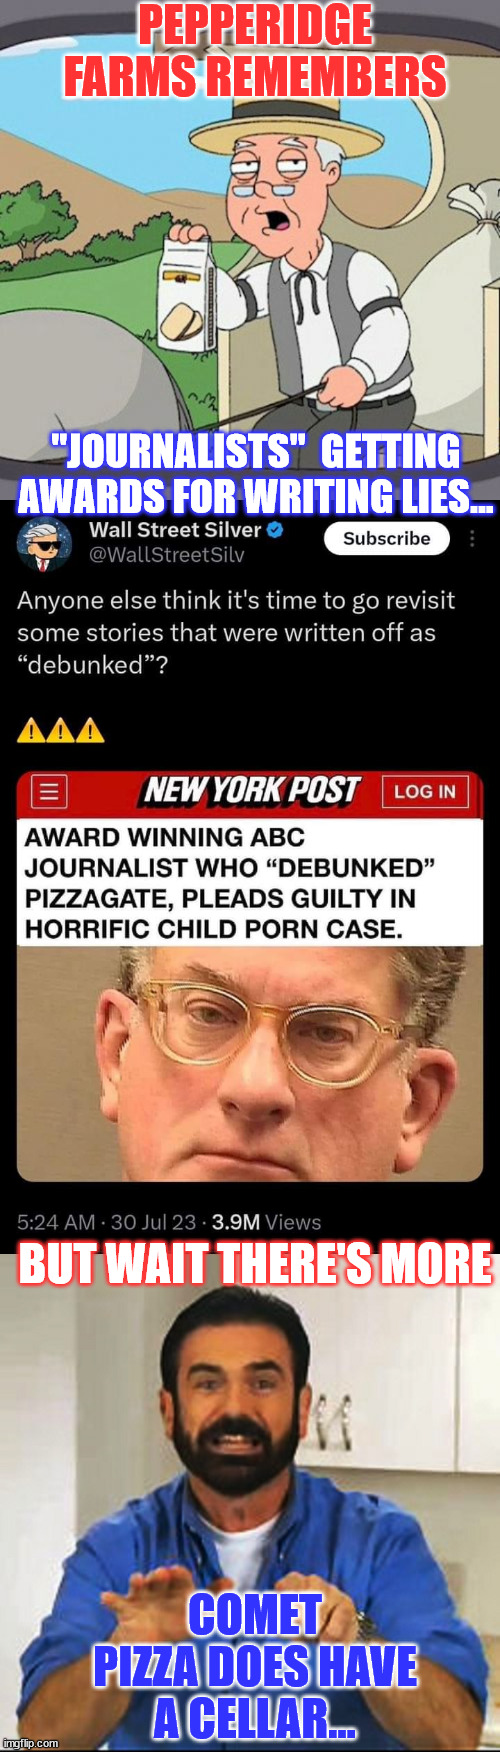 Well that didn't get debunked like they wanted it to... | PEPPERIDGE FARMS REMEMBERS; "JOURNALISTS"  GETTING AWARDS FOR WRITING LIES... BUT WAIT THERE'S MORE; COMET PIZZA DOES HAVE A CELLAR... | image tagged in memes,pepperidge farm remembers,fake news,journalism,pizza,liars | made w/ Imgflip meme maker